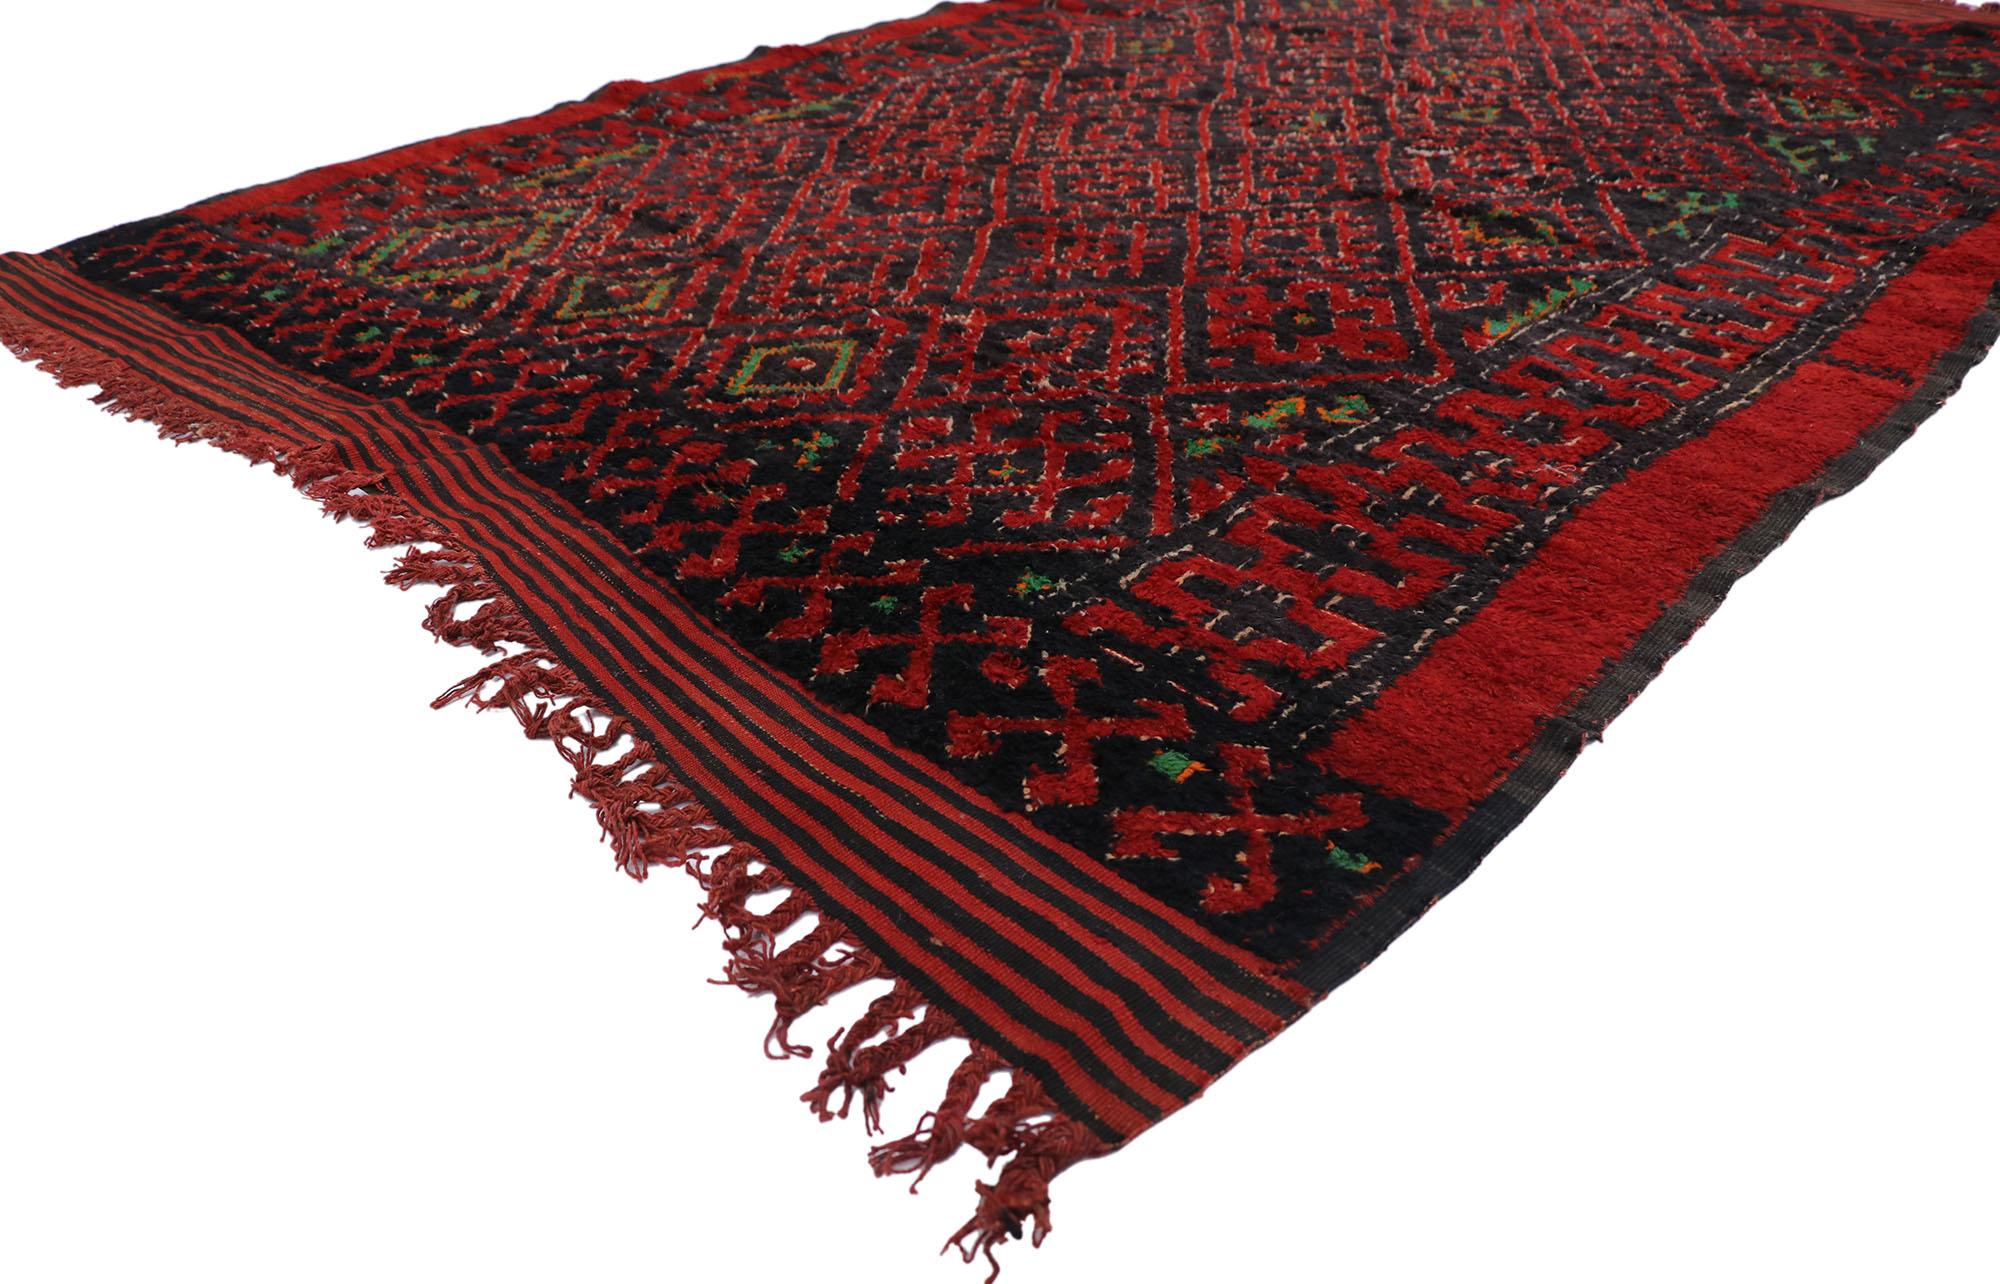 21239 Vintage Berber Beni M'Guild Moroccan rug with Tribal style 05'08 x 07'08. Showcasing a bold expressive design, incredible detail and texture, this hand knotted wool vintage Berber Beni M'Guild Moroccan rug is a captivating vision of woven